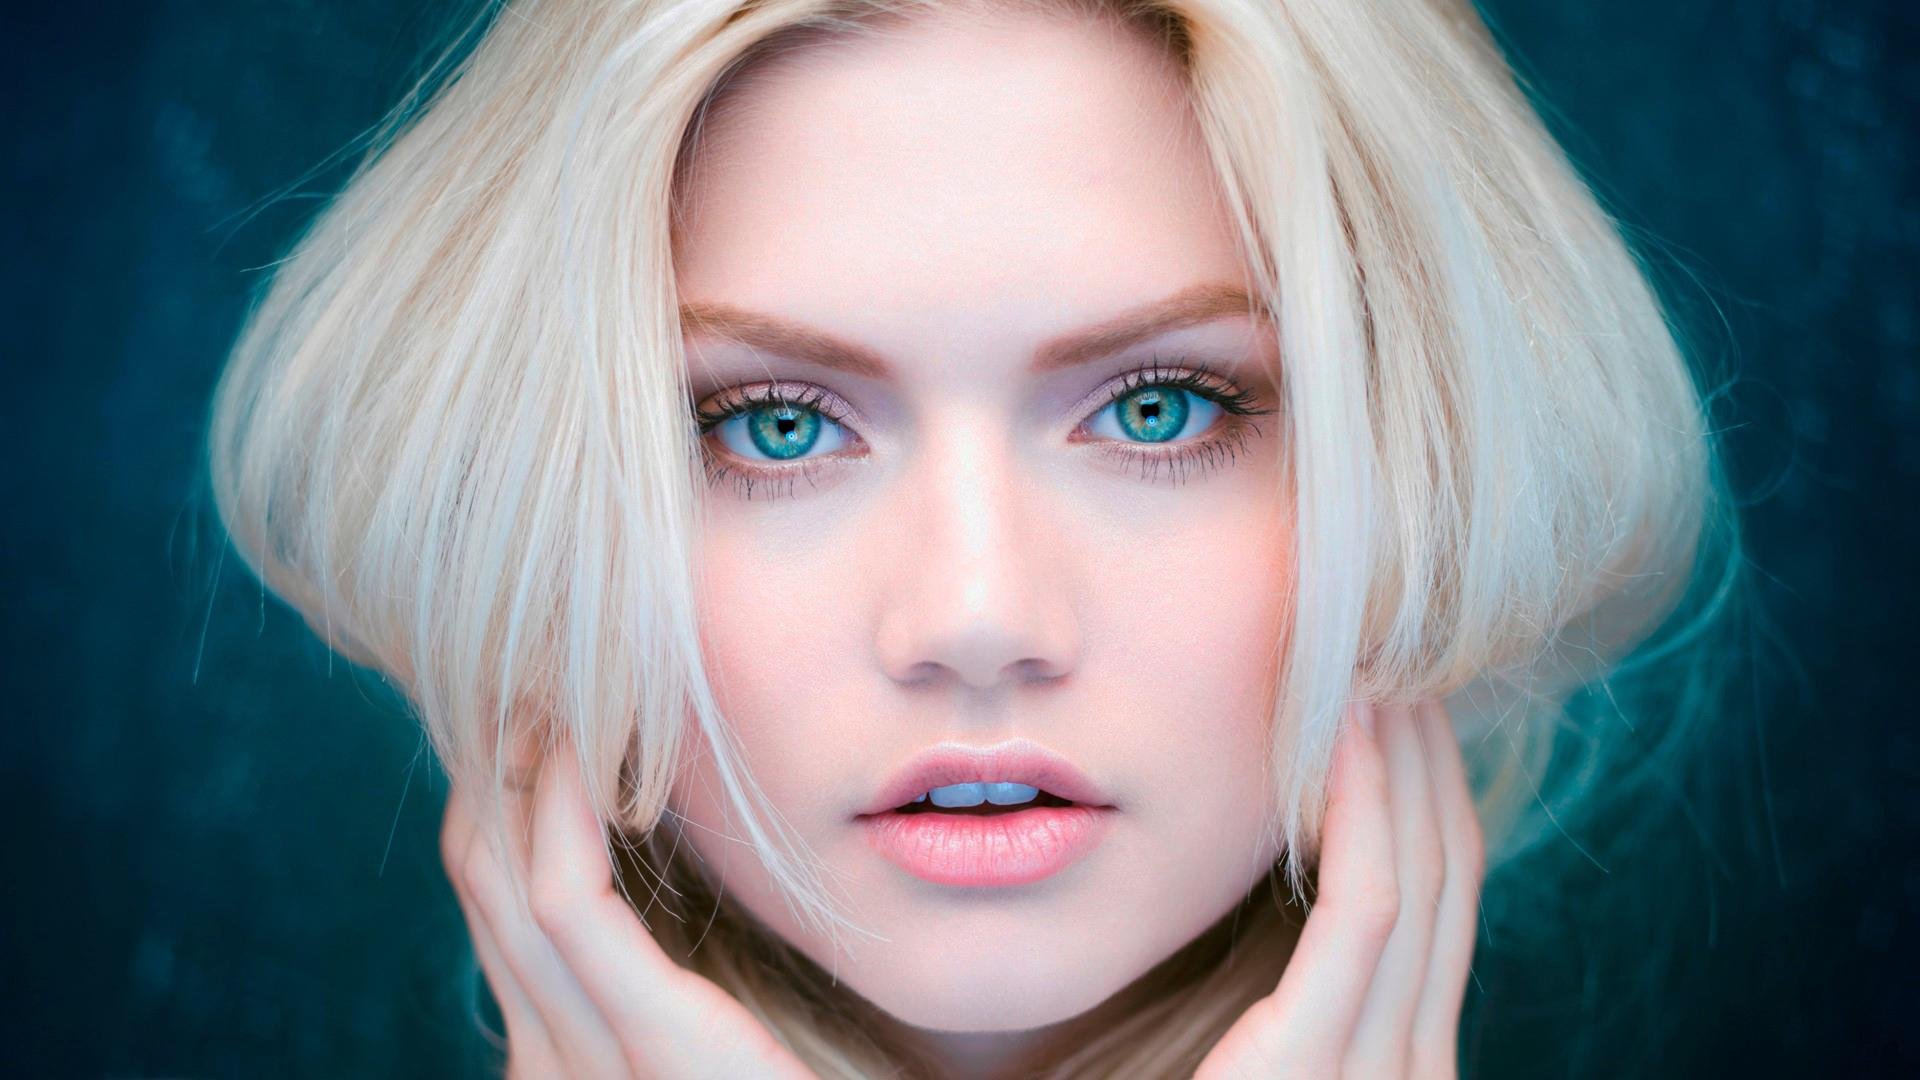 4. "10 Gorgeous Hair Colors for Blue-Eyed Girls" - wide 8